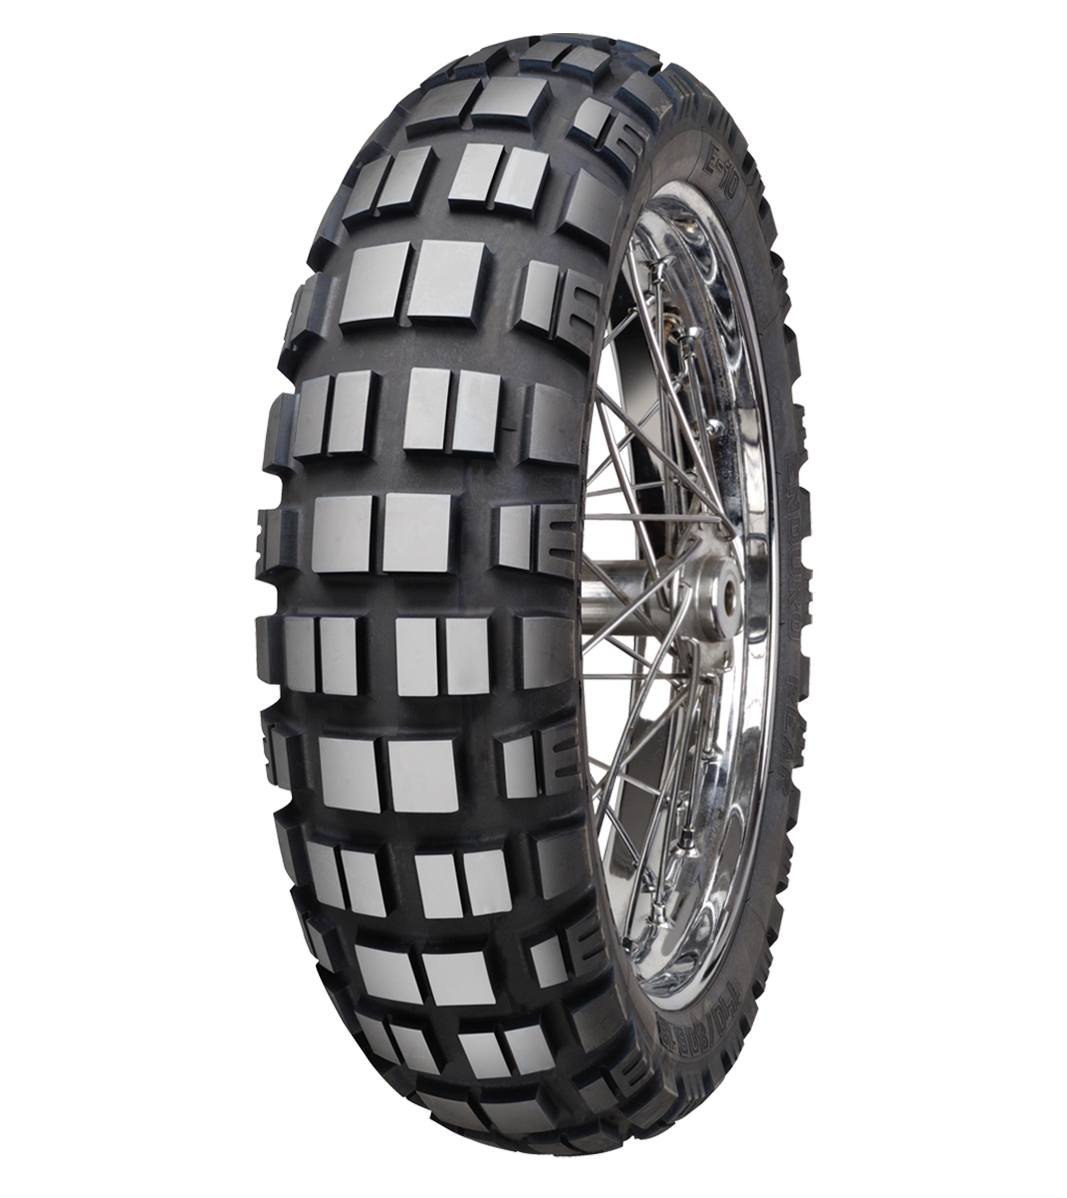 Mitas E-10 ENDURO 170/60B17 Trail OFF Trail 72Q No Stripe Tubeless Rear Tire, 224033, 170/60B17, Adventure Touring, E Series, E-10 Enduro, Rear, Trail, Trail OFF, Tires - Imported and distributed in North & South America by Lindeco Genuine Powersports - Premier Powersports Equipment and Accessories for Motorcycle Enthusiasts, Professional Riders and Dealers.